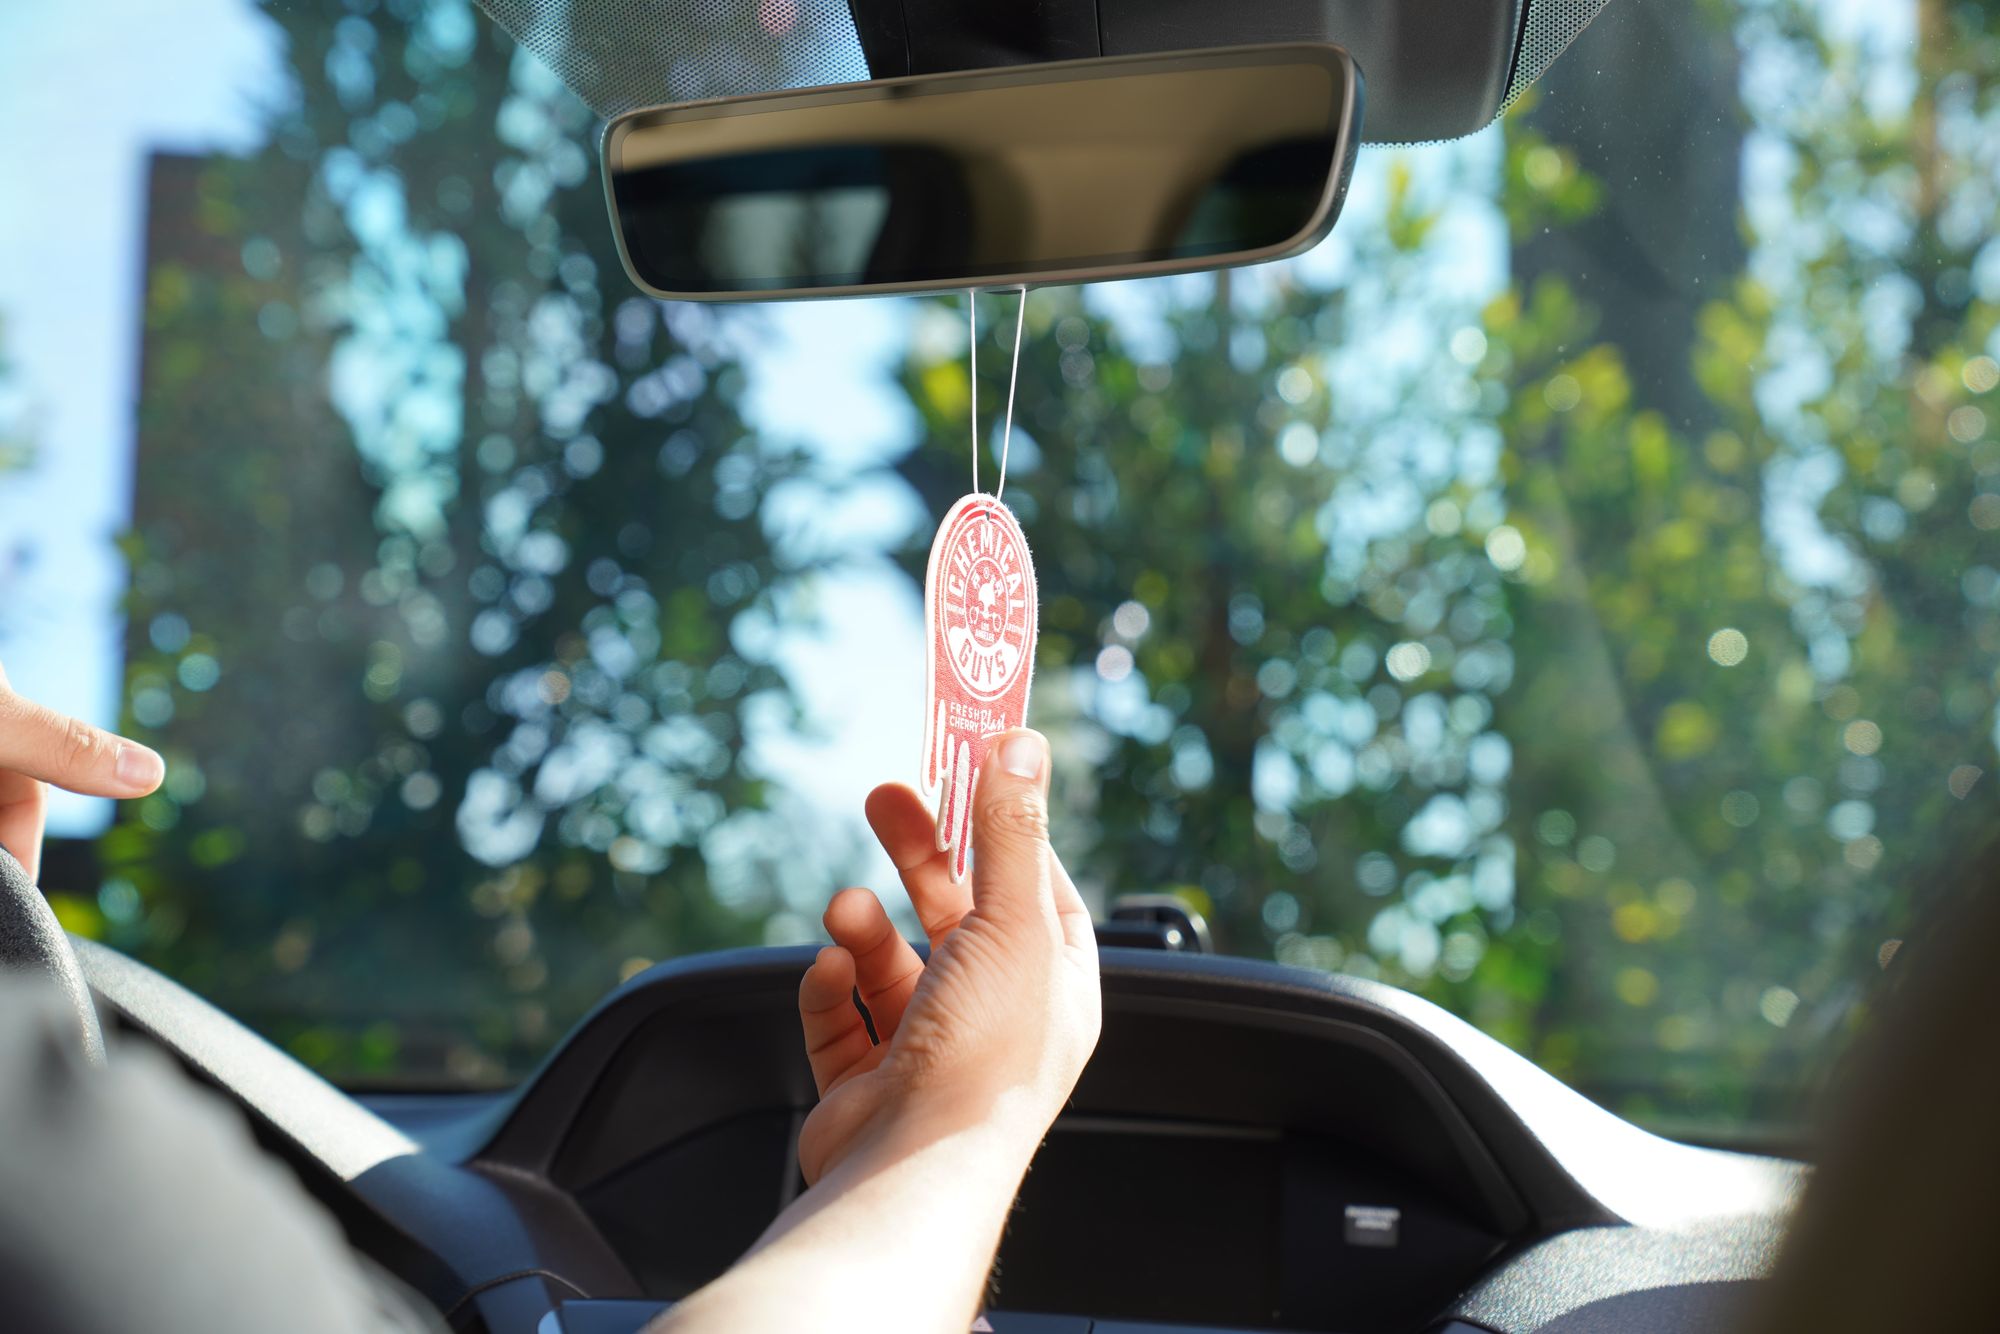 Hanging a Cherry Blast-scented Hanging Air Freshener on the rear view mirror